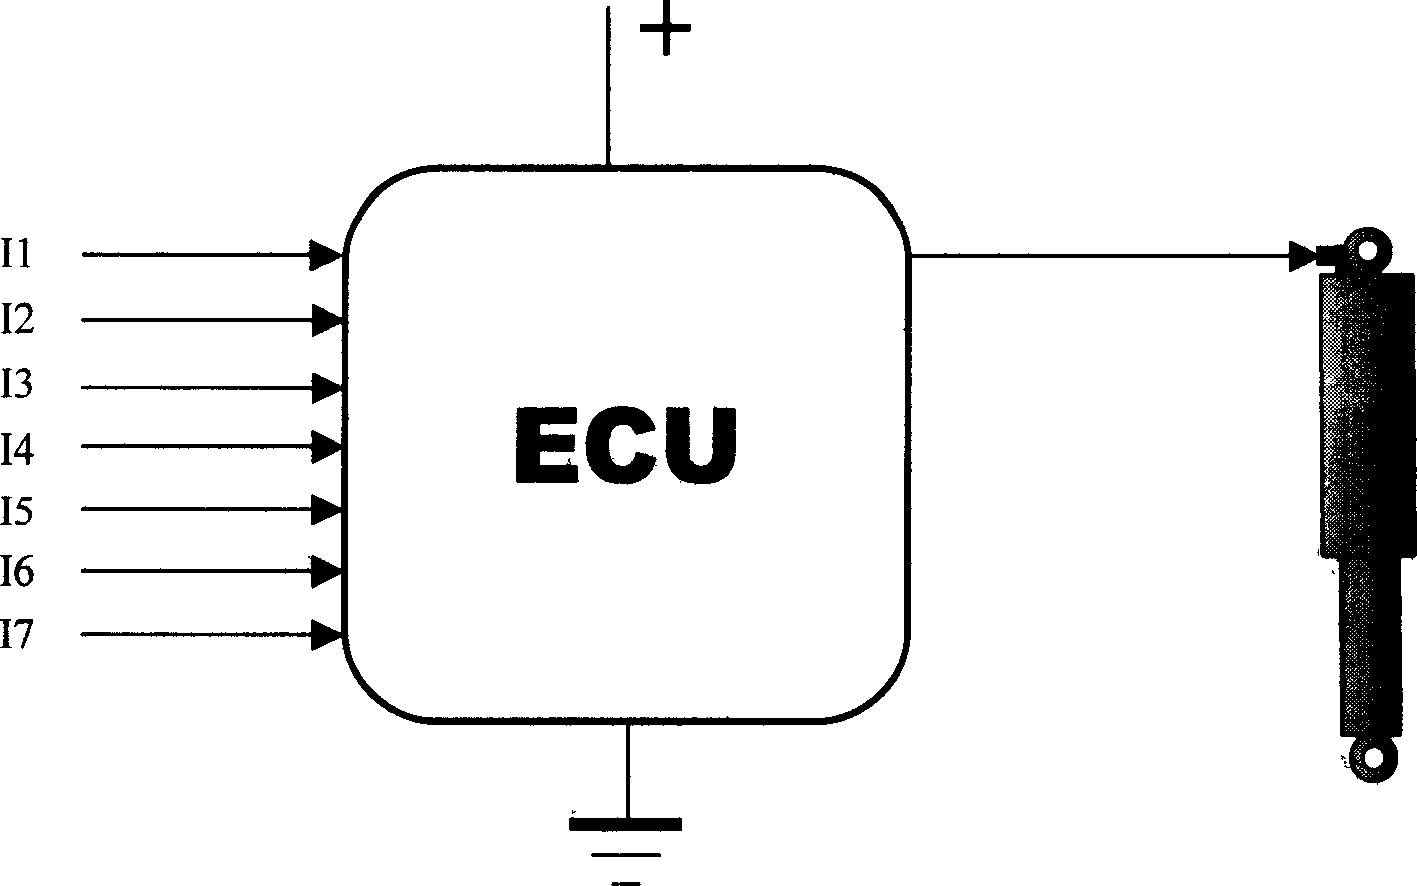 Electrici controlled type variable damping attenuator